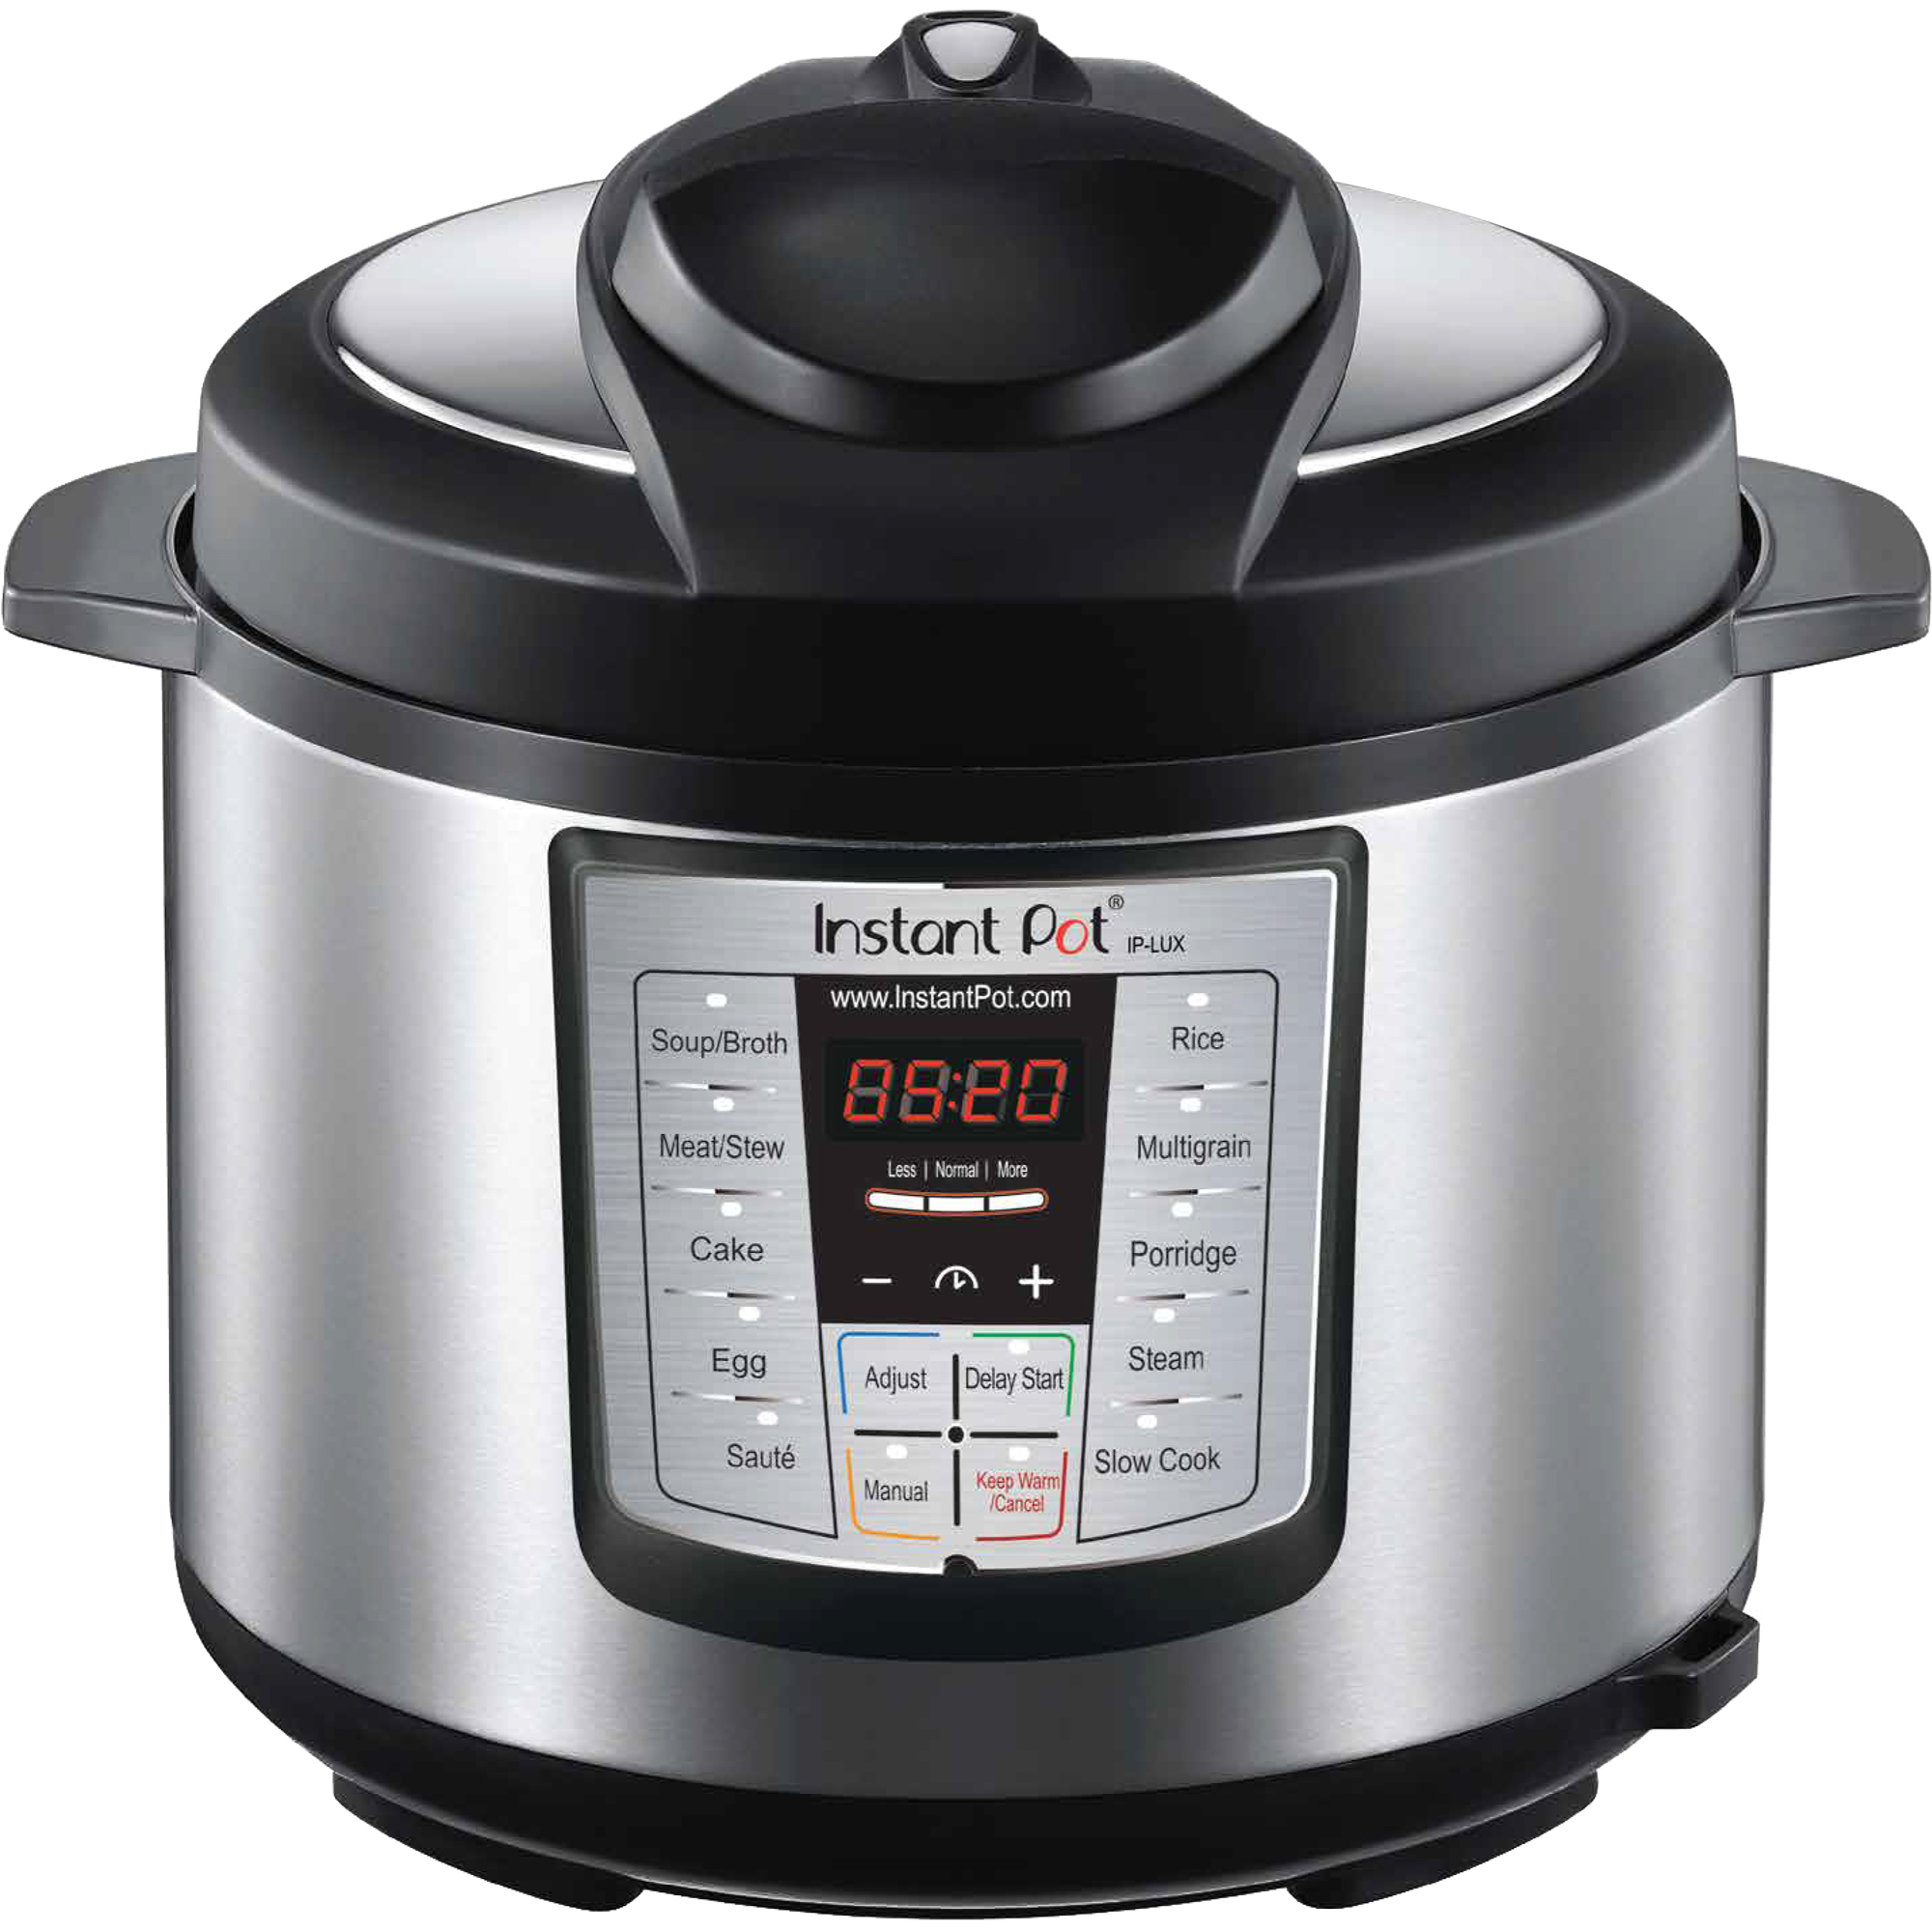 Instant Pot Stainless Steel Lux 5 Quart Multi-Use Programmable Pressure Cooker - image 1 of 5